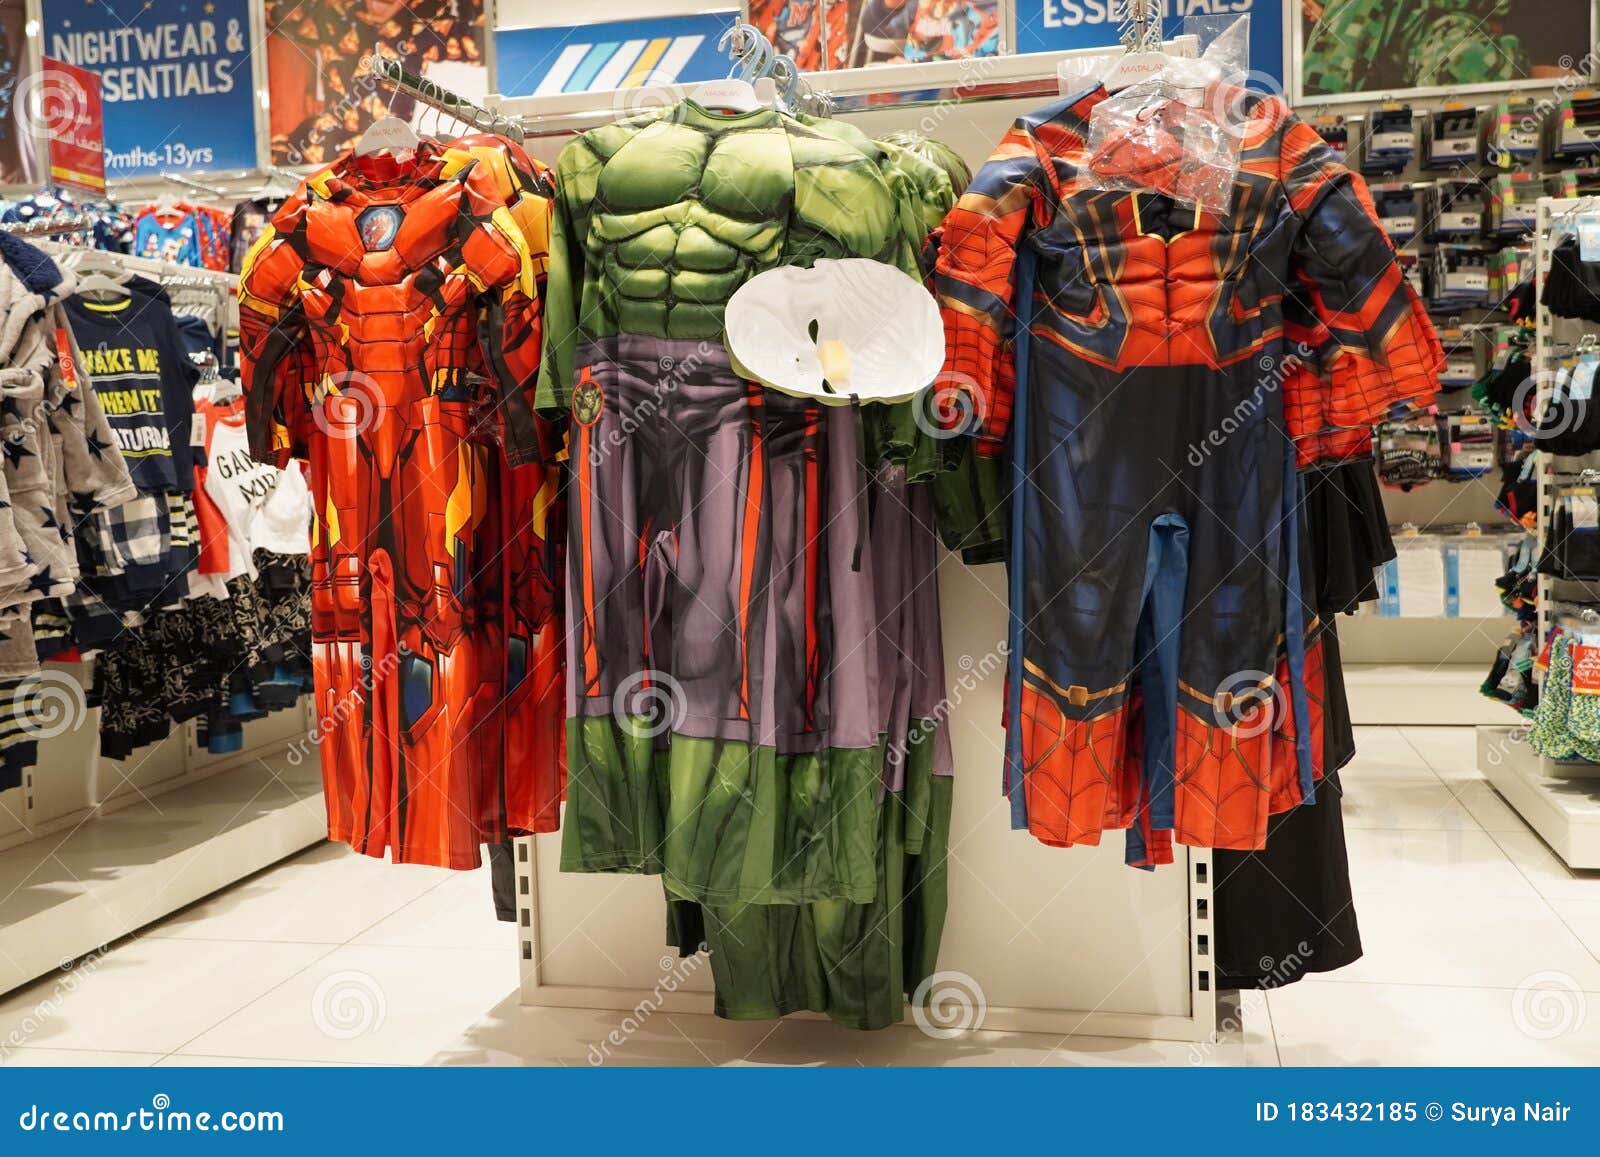 Spiderman, Superman, Action Figures Costume for Kids Hanging for Inside a Boutique Shop in a Mall. : Children Editorial Image - Image of industry, action: 183432185